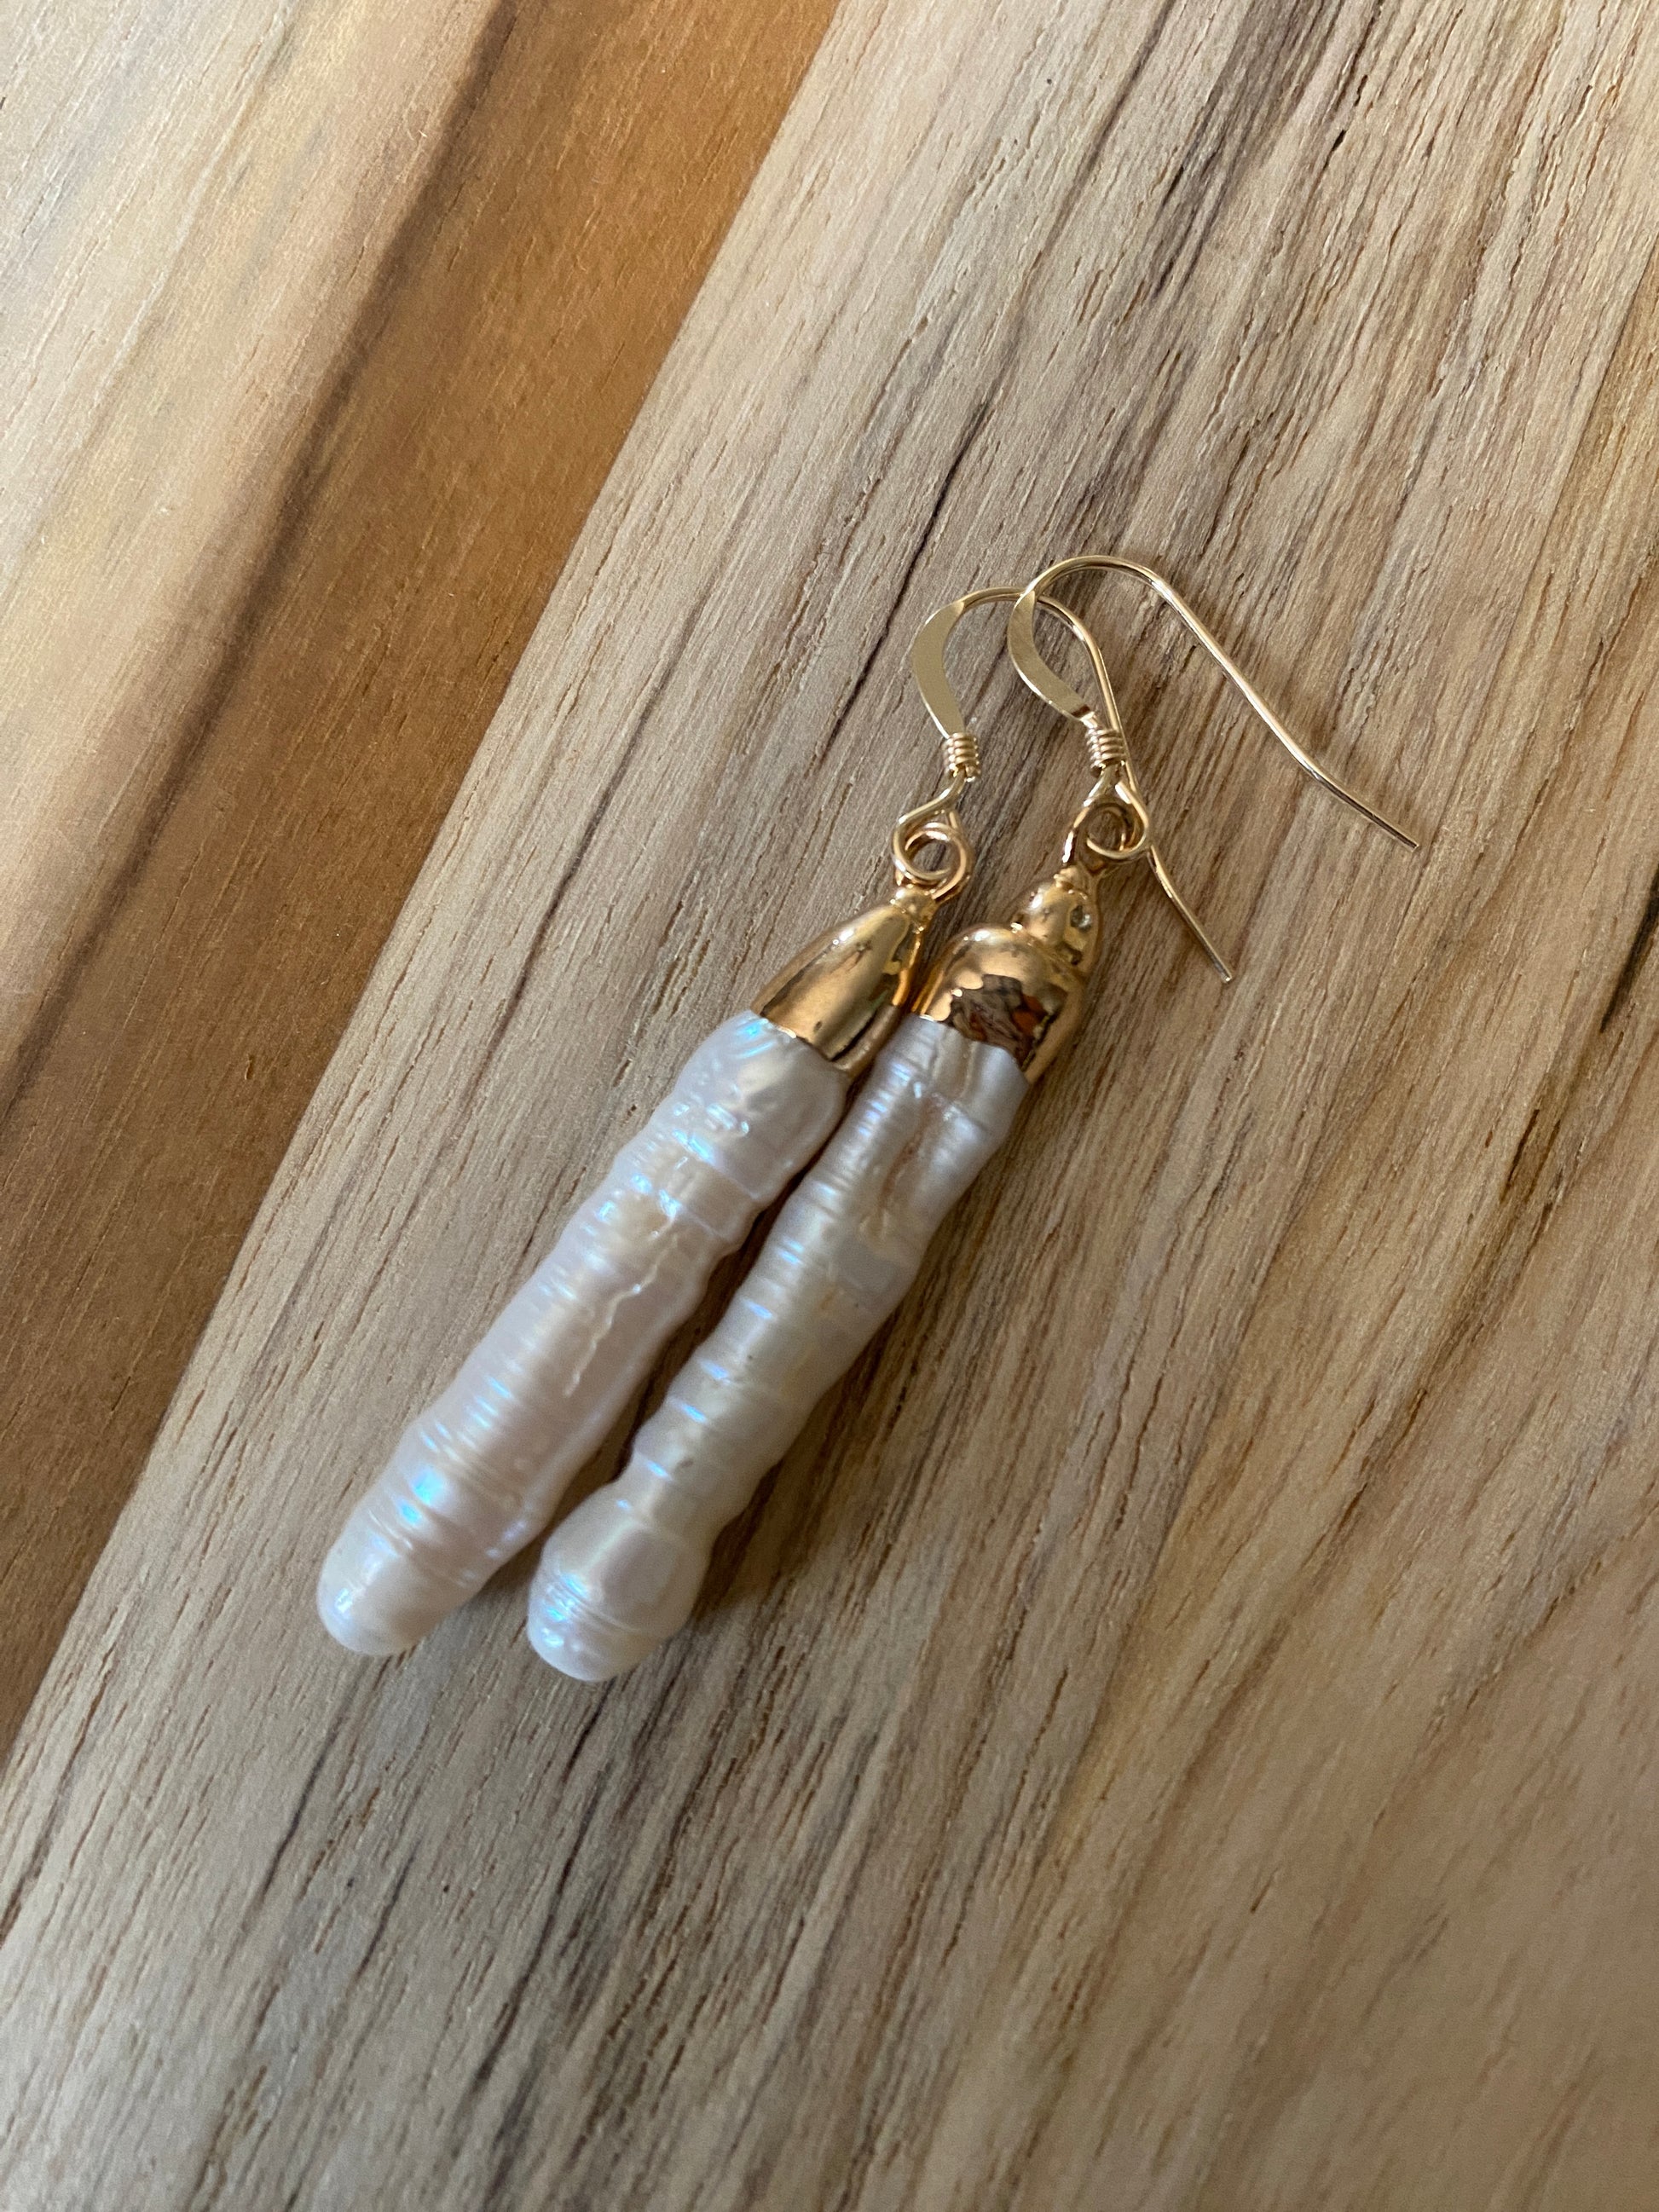 Long White Stick Pearl Dangle Earrings with Gold Filled Ear Wire - My Urban Gems